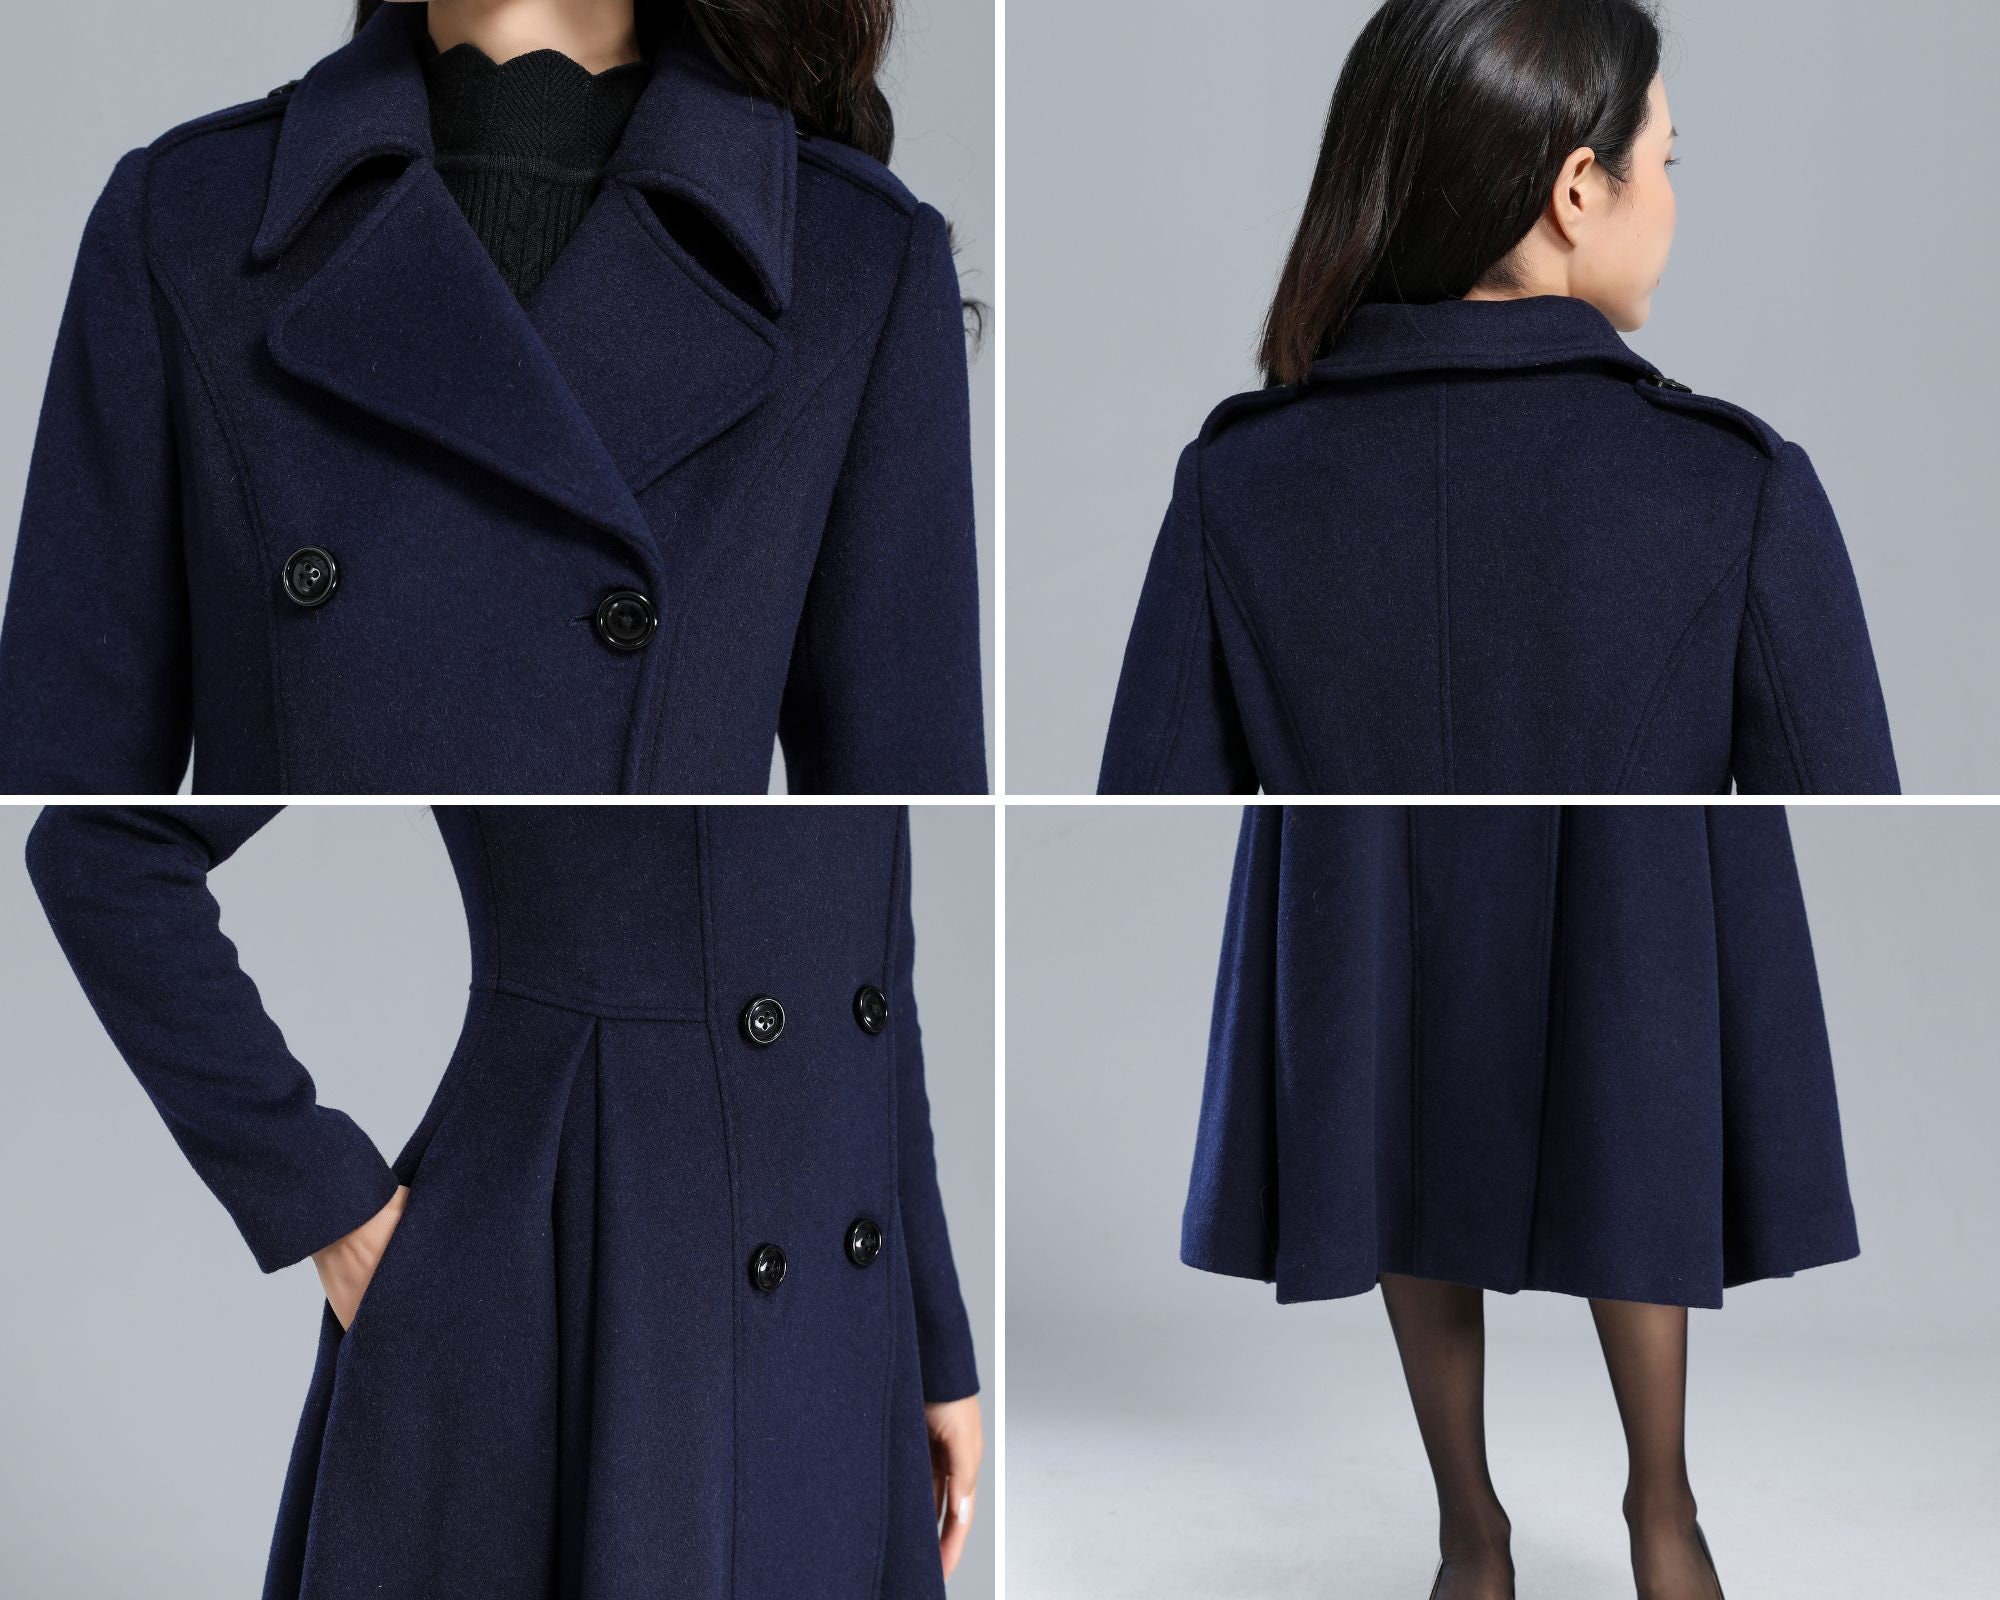 fit and flare dress coat for winter, blue wool coat 1648#